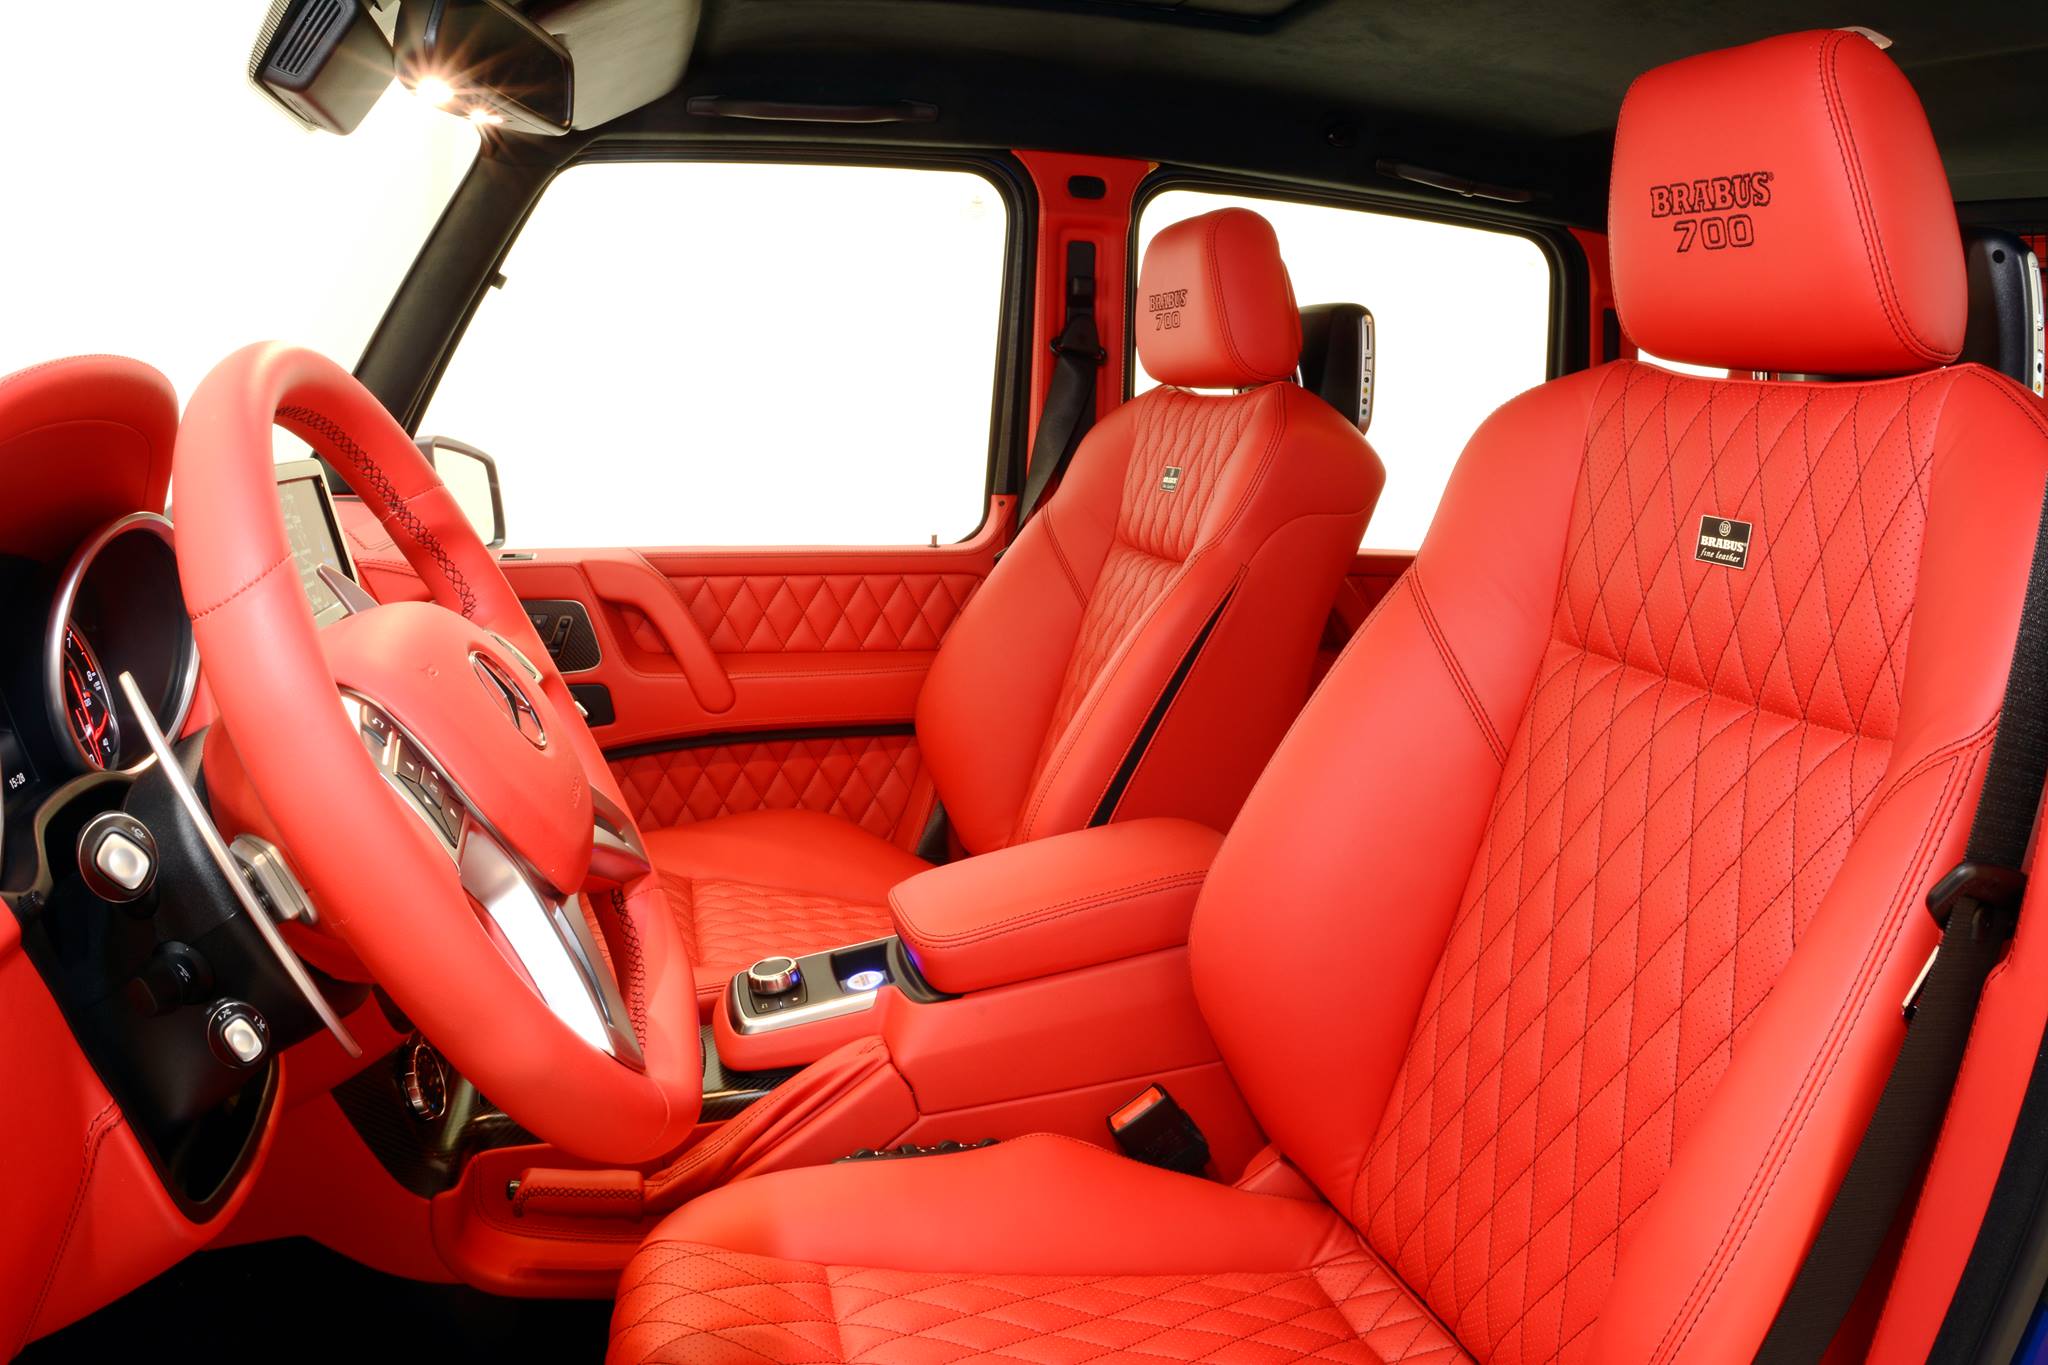 brabus-700-hp-g63-amg-combines-blue-paint-and-red-leather_14-autonovosti.me-10